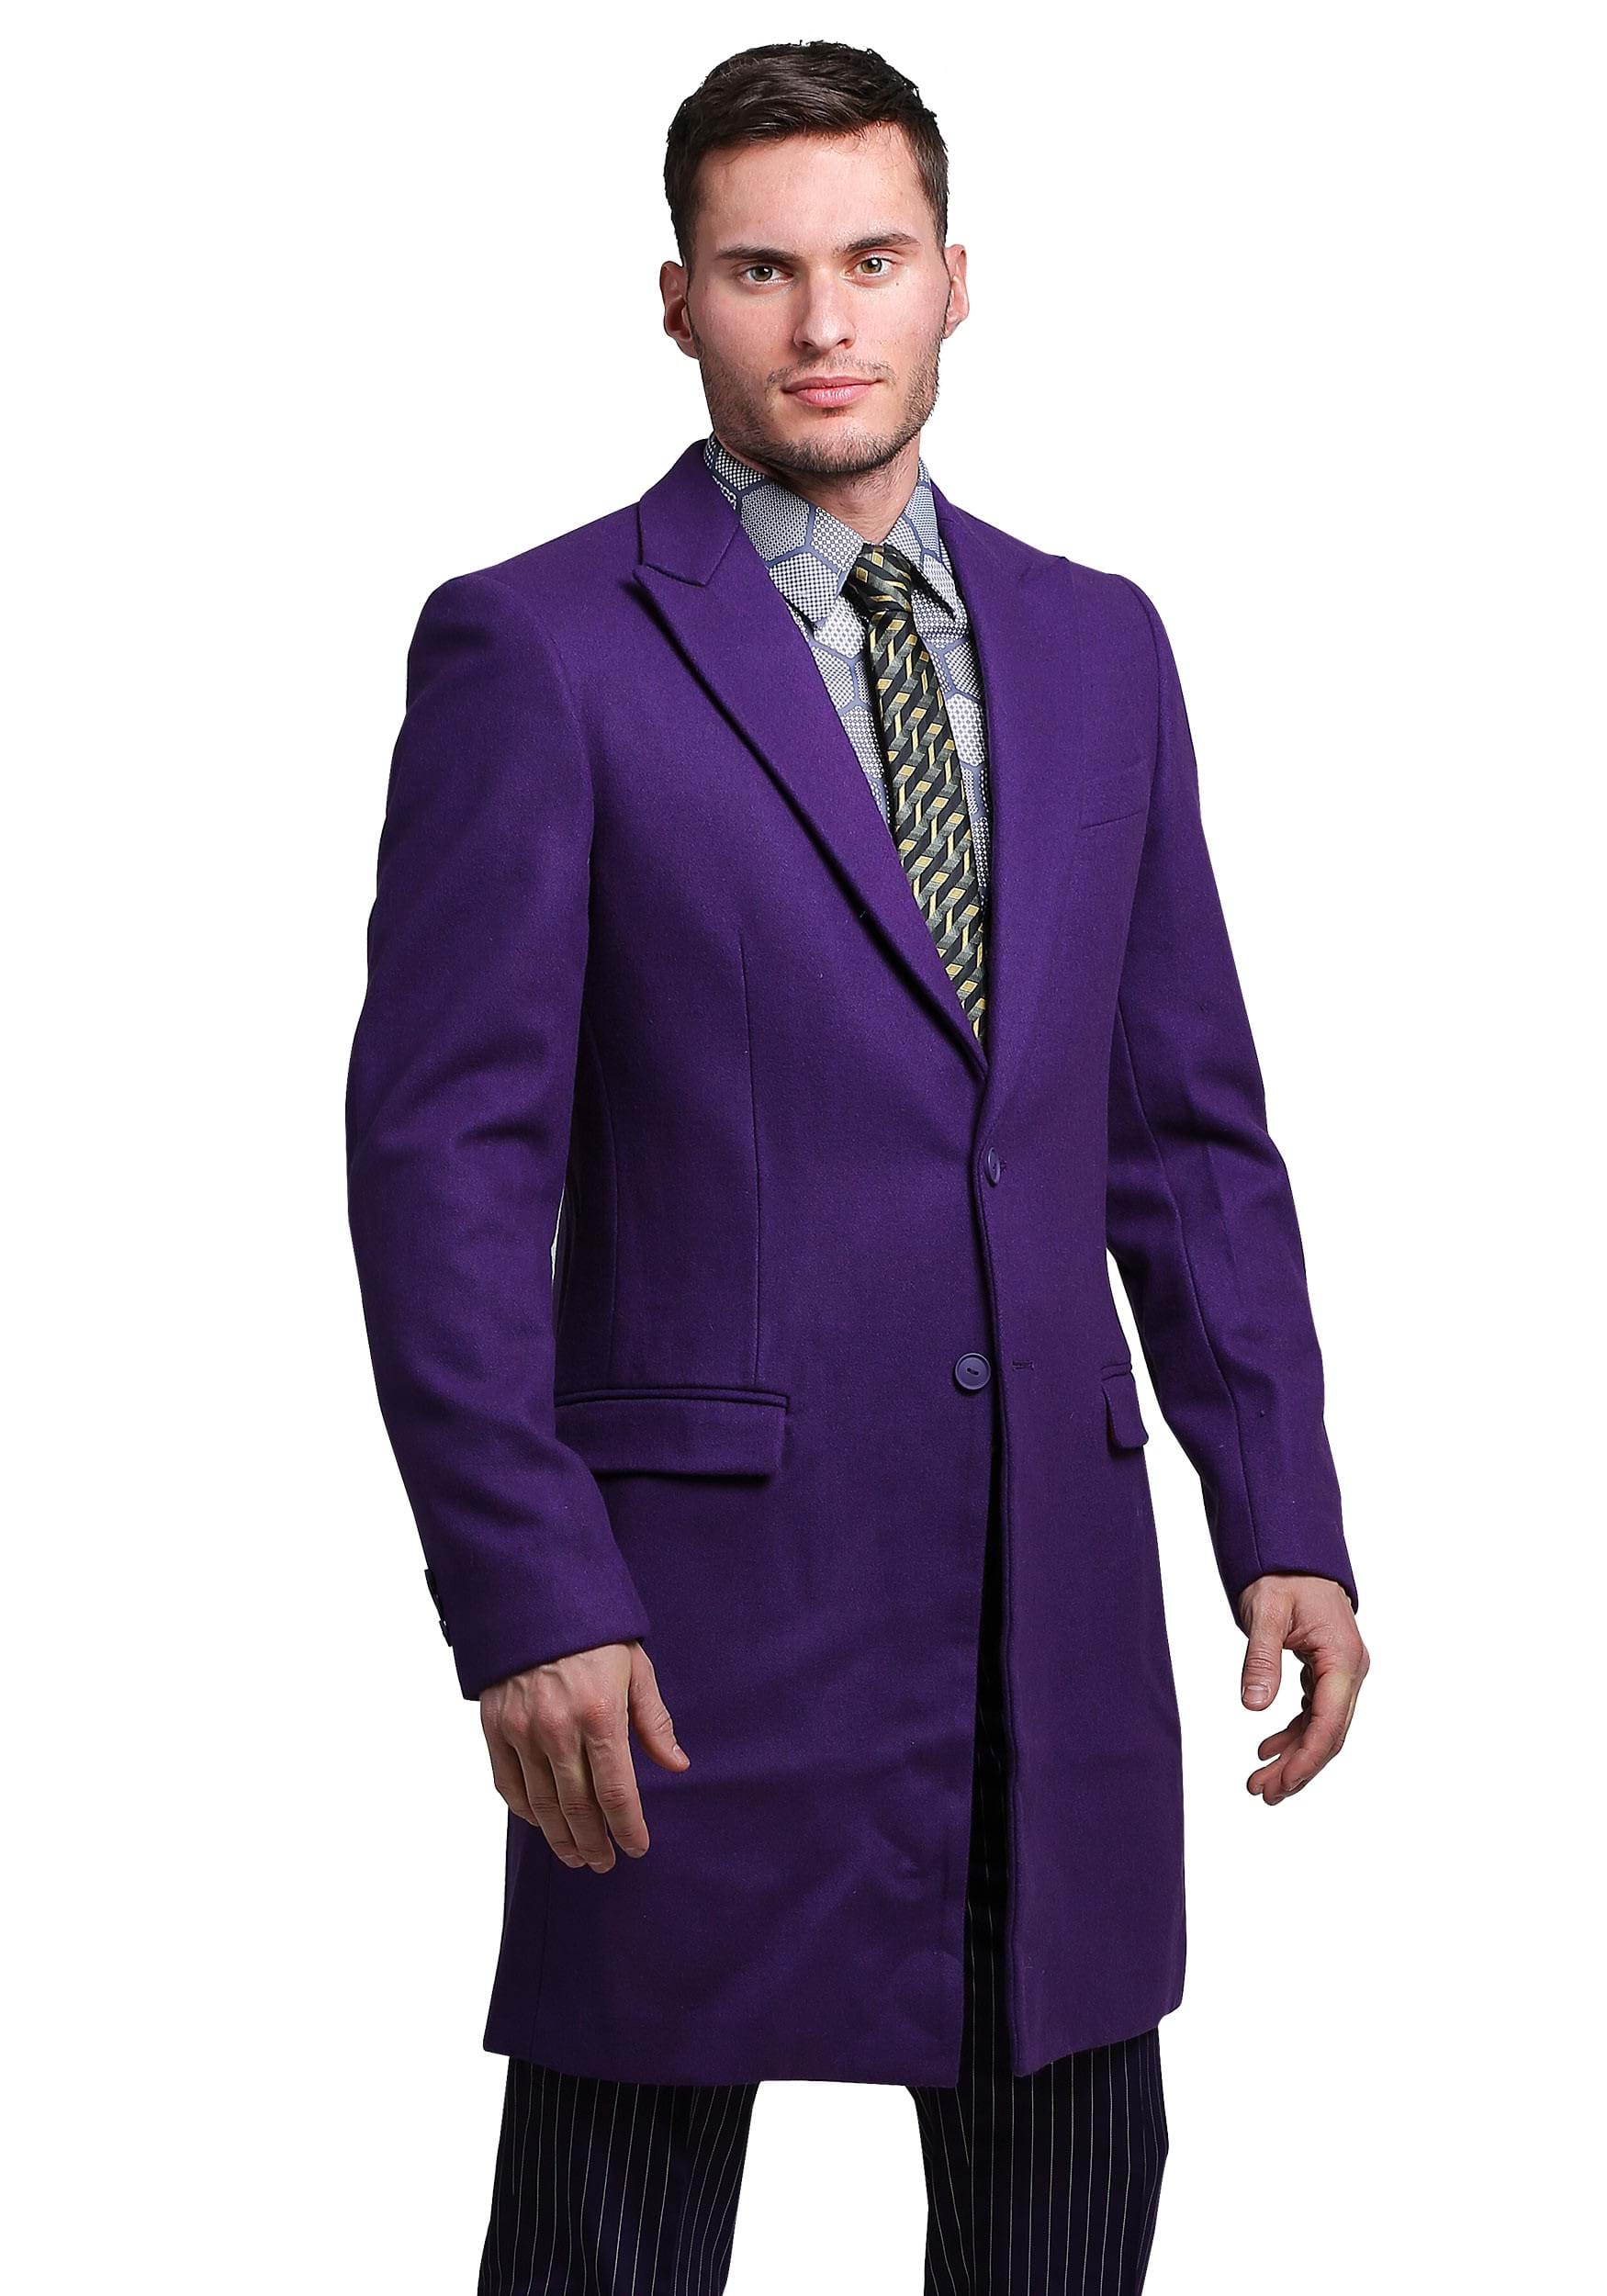 Image of THE JOKER Slim Fit Suit Overcoat (Authentic) ID FUN9011O-50